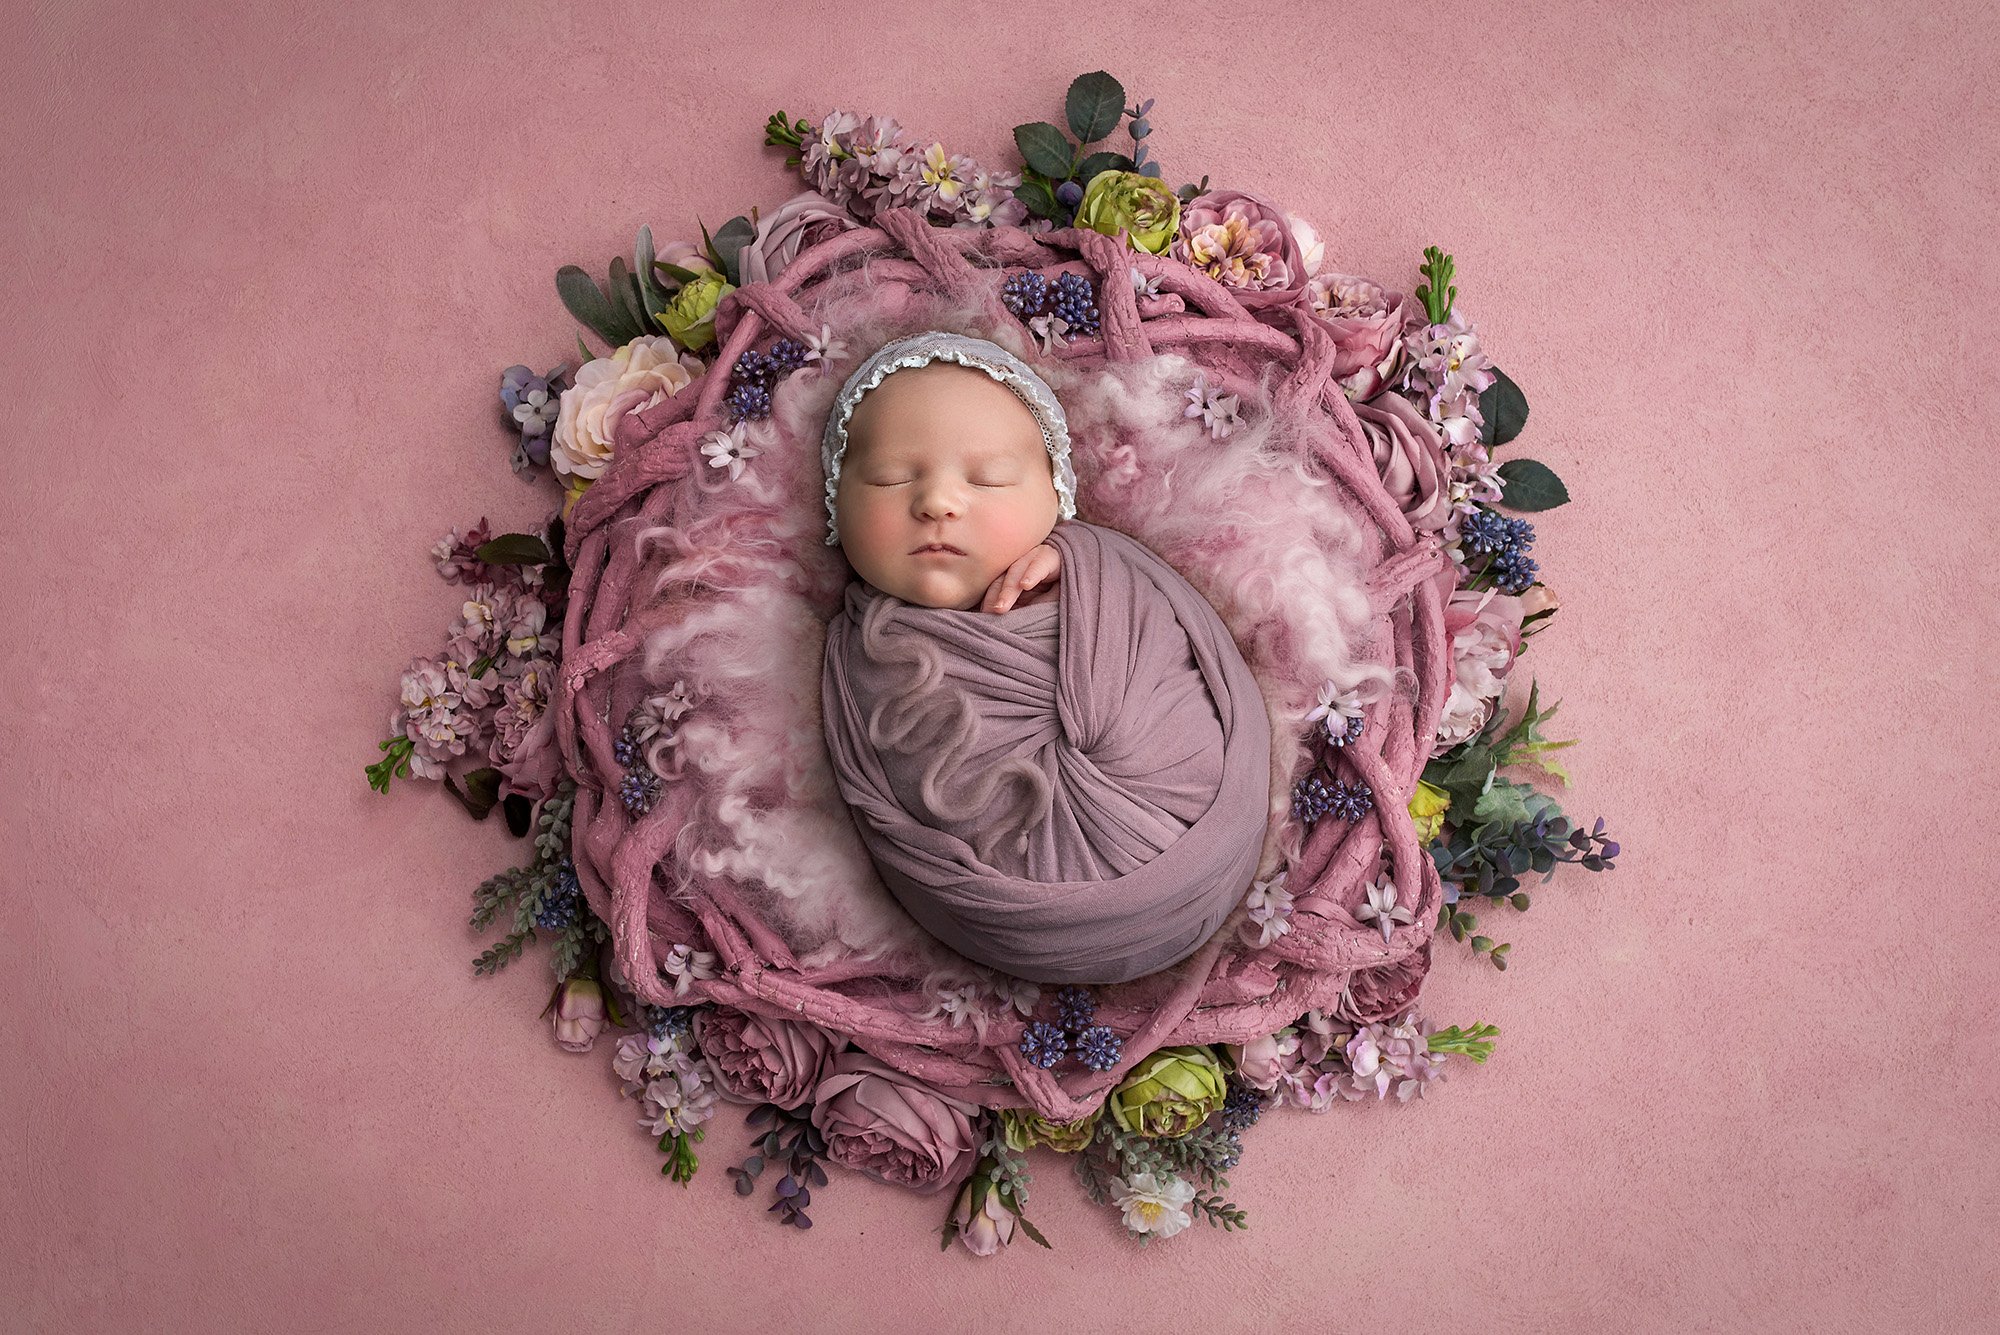 swaddled newborn pictures newborn baby girl asleep in lavender wrap laying on a purple floral wreath on pink background